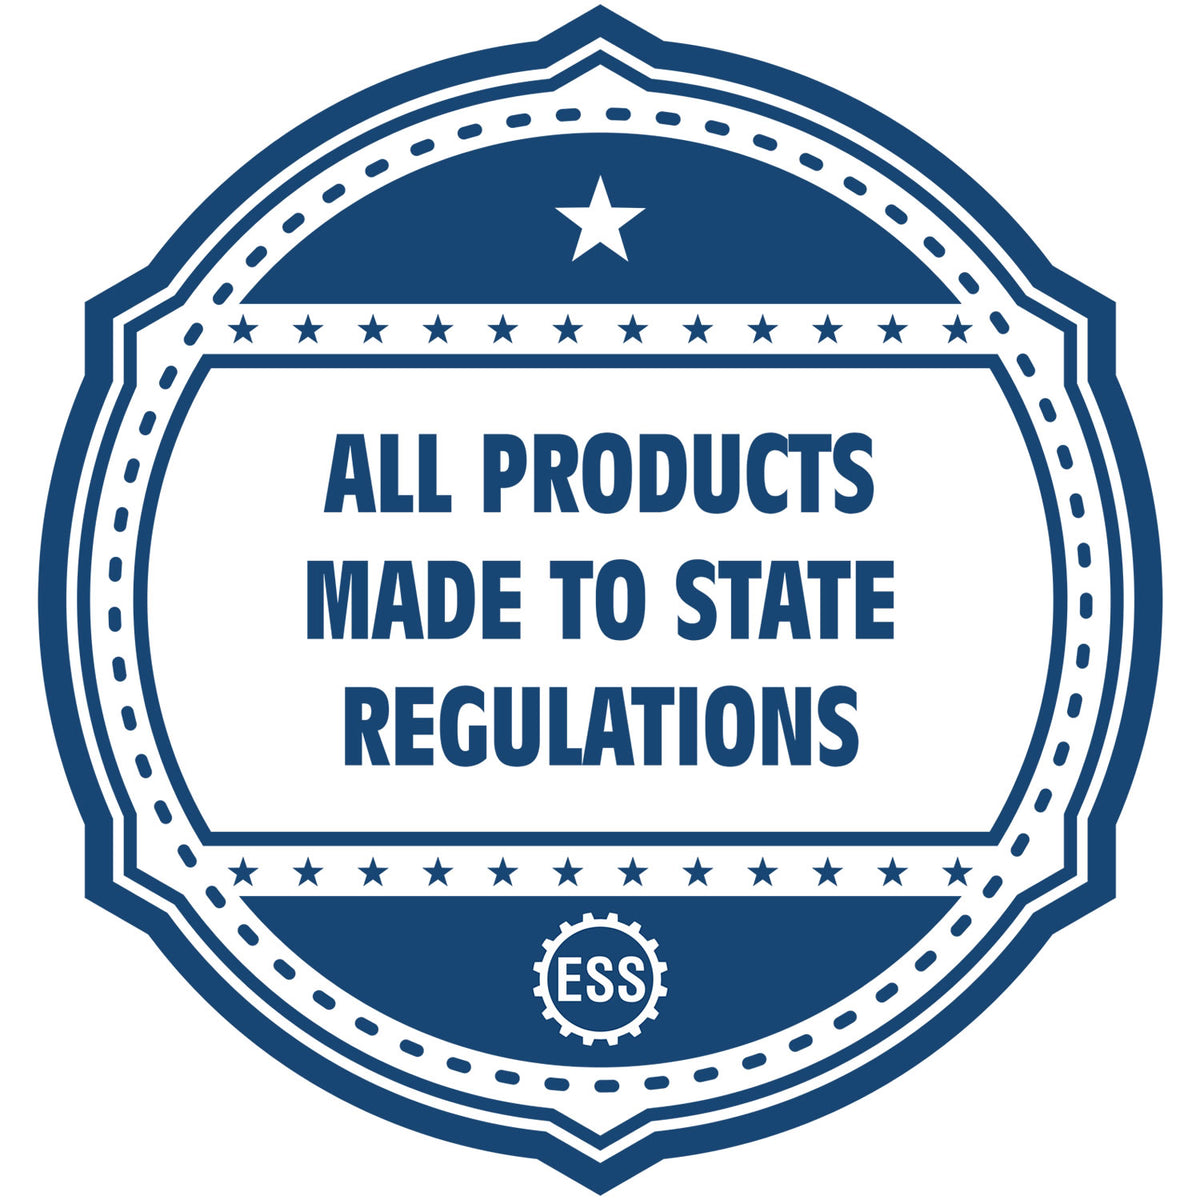 A blue icon or badge for the Gift Arkansas Landscape Architect Seal showing that this product is made in compliance with state regulations.